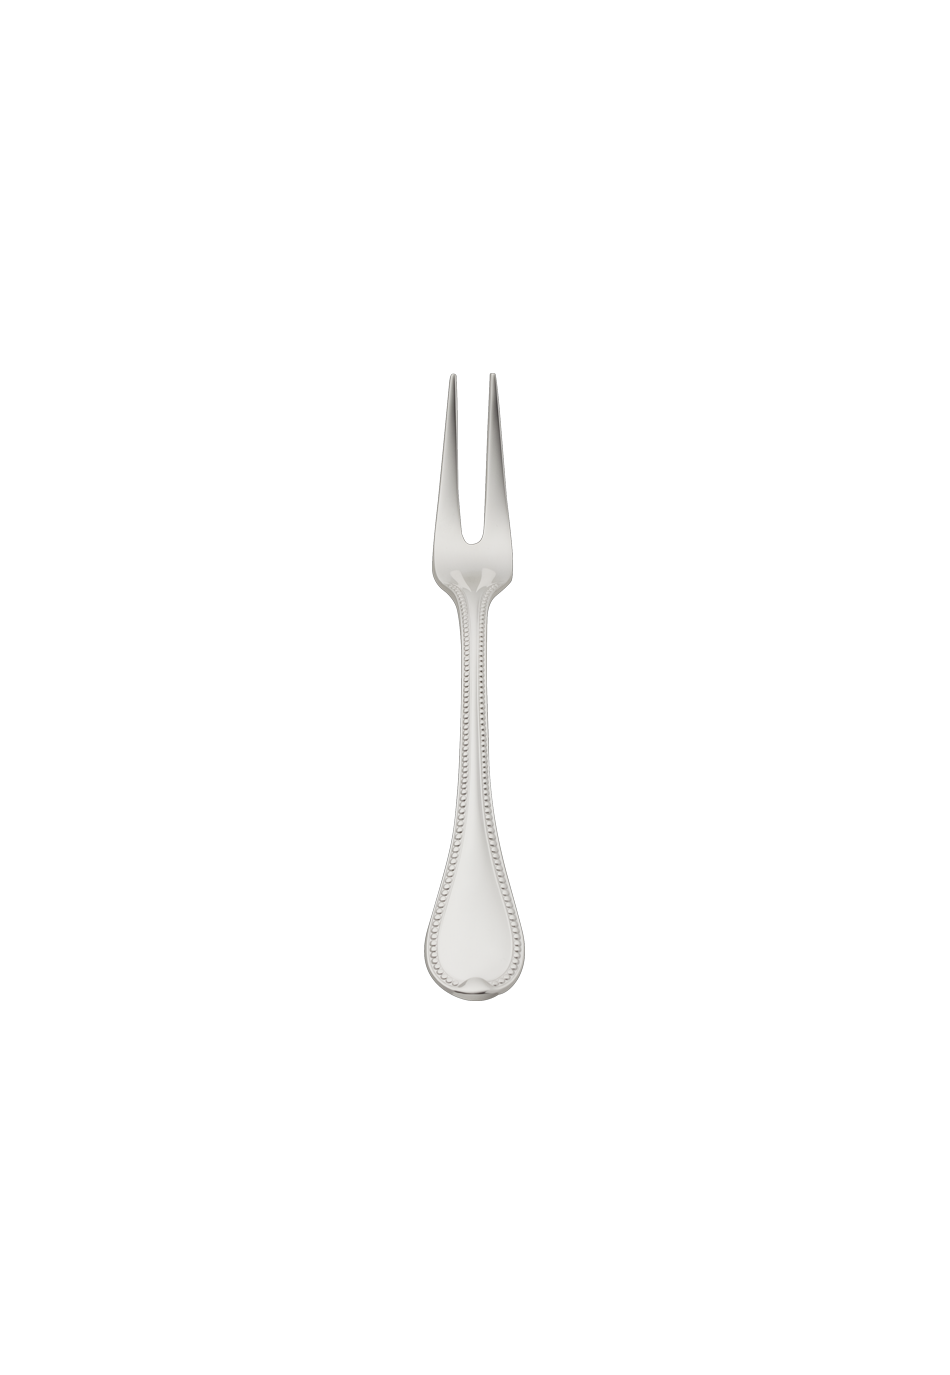 Franz. Perl Meat Fork, small (150g massive silverplated)